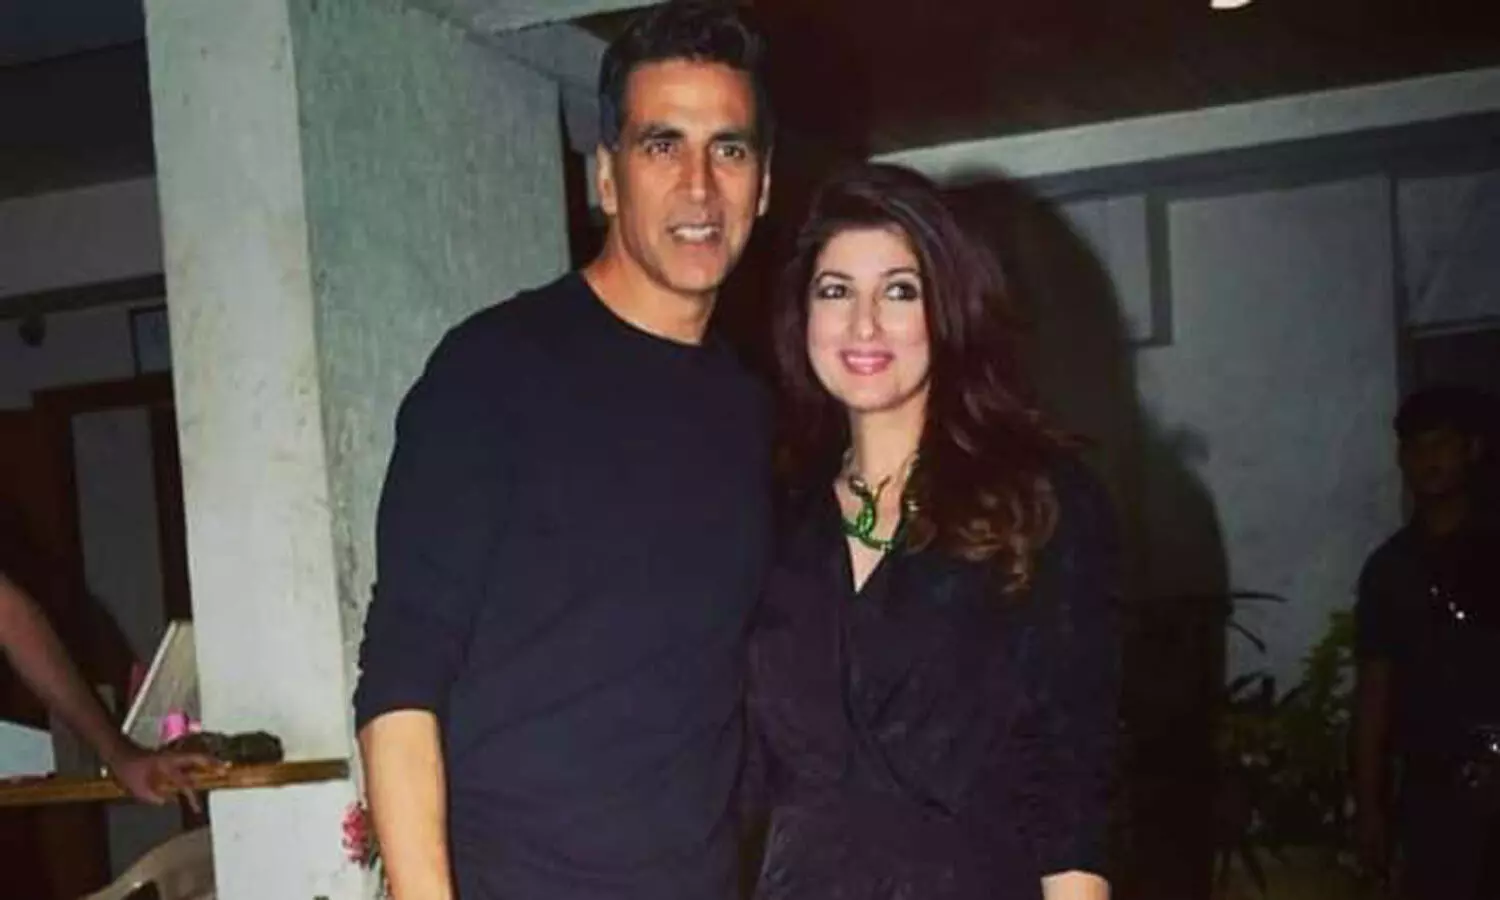 Akshay Kumar tests COVID-19 negative, confirms Twinkle Khanna with quirky caricature